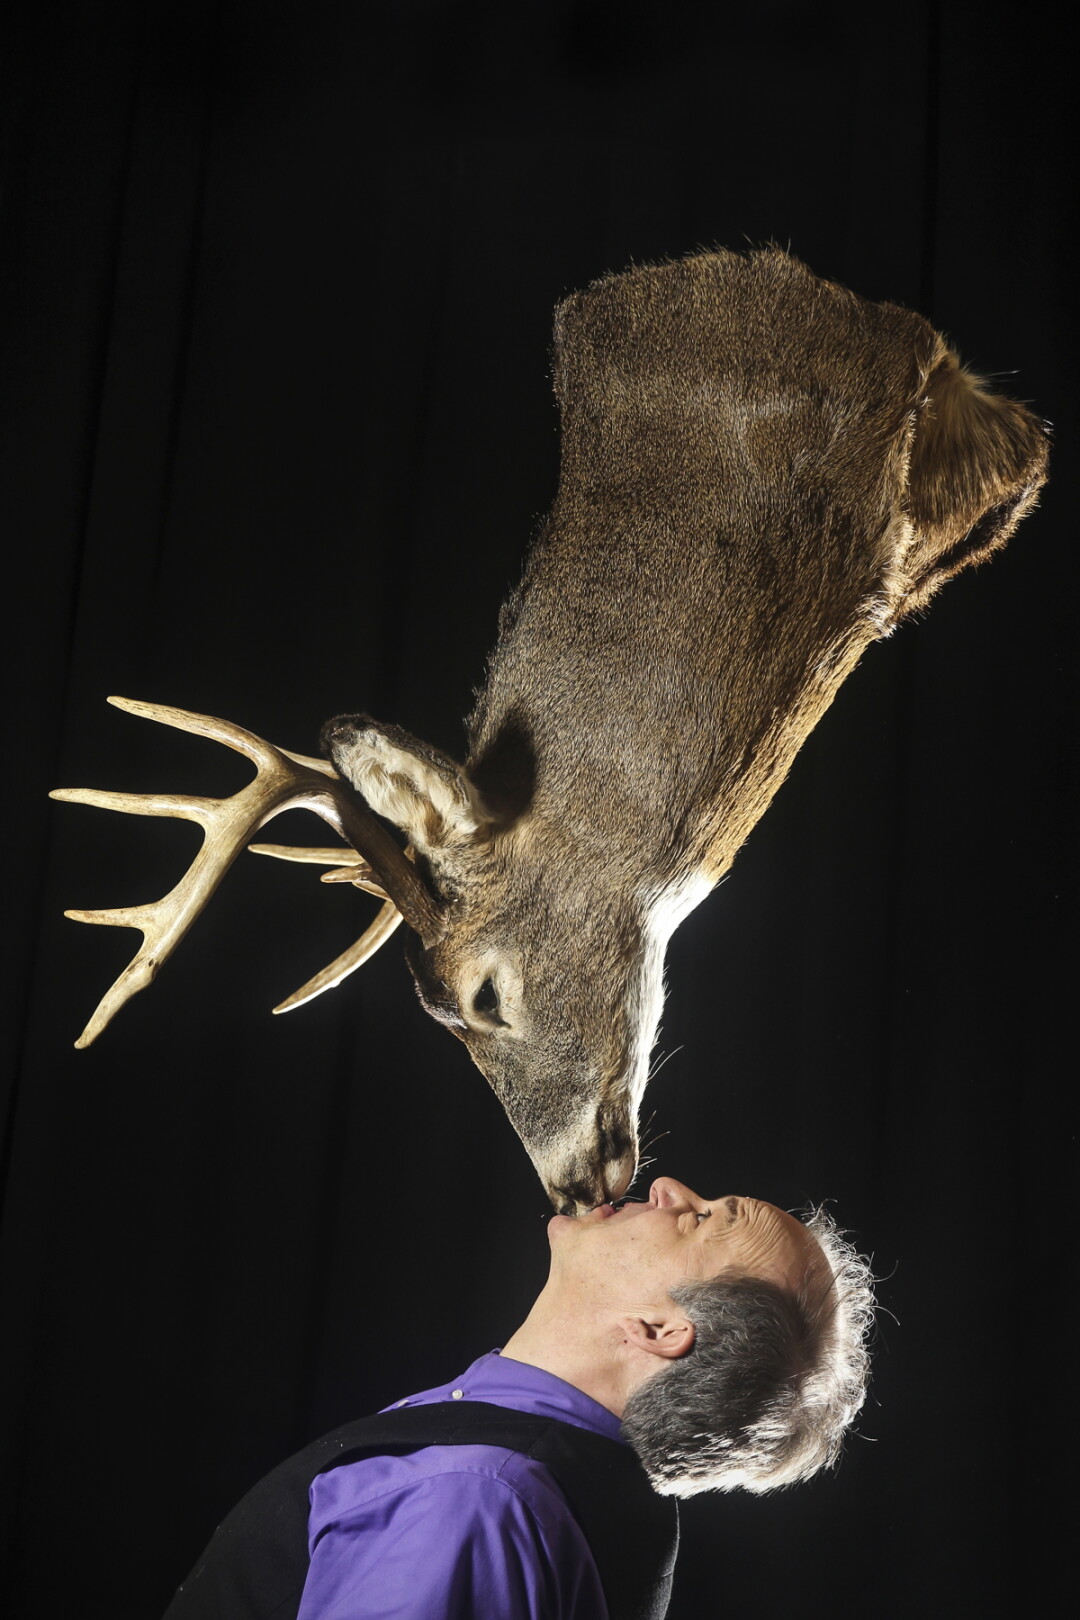 JUST KISS ME, DEER. Stores from Steve Russell’s 35-year career as a traveling comedic entertainer provided plenty of material for his new one-man stage show, The Casual Suspect.